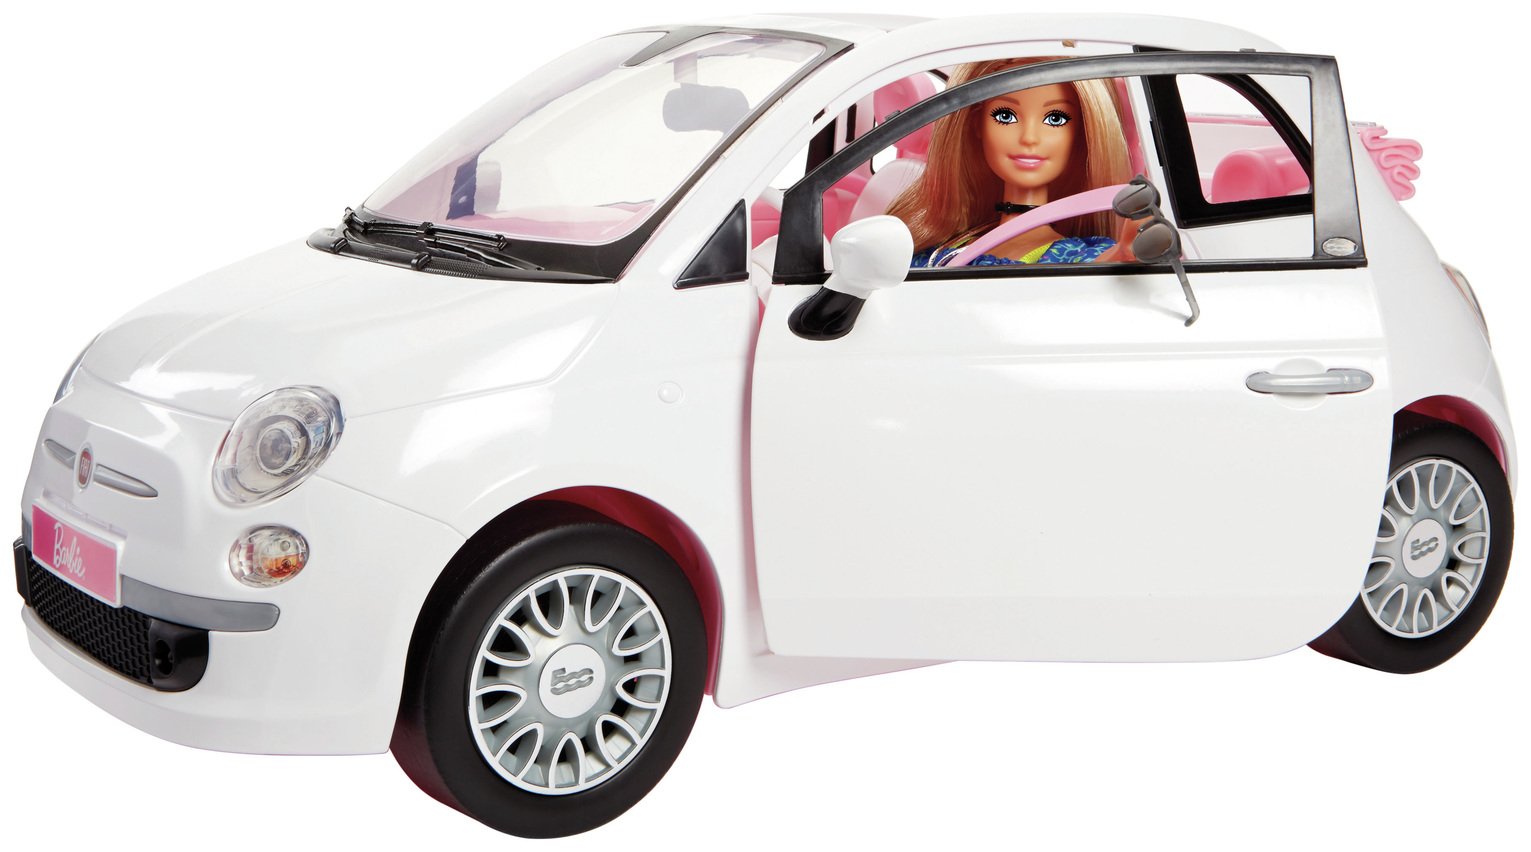 barbie doll car with doors that open